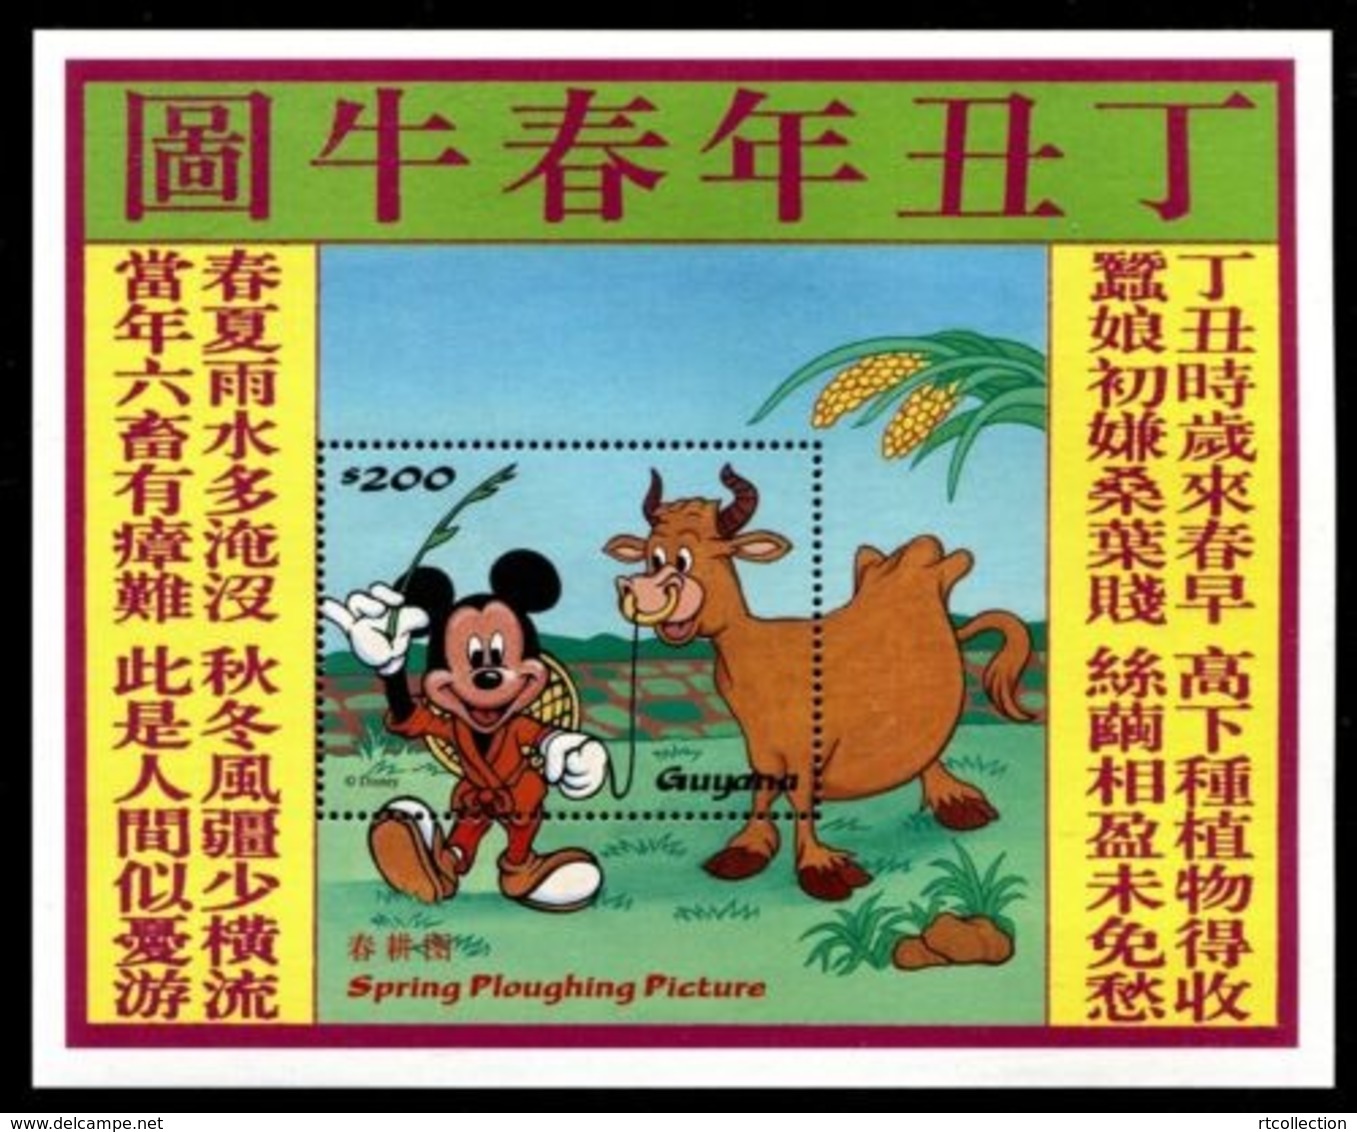 Guyana 1997 Disney Spring Plough Happy Chinese New Year OX Mickey Celebrations Cow S/S Stamp SC#3125 Mi BL527 - Cows